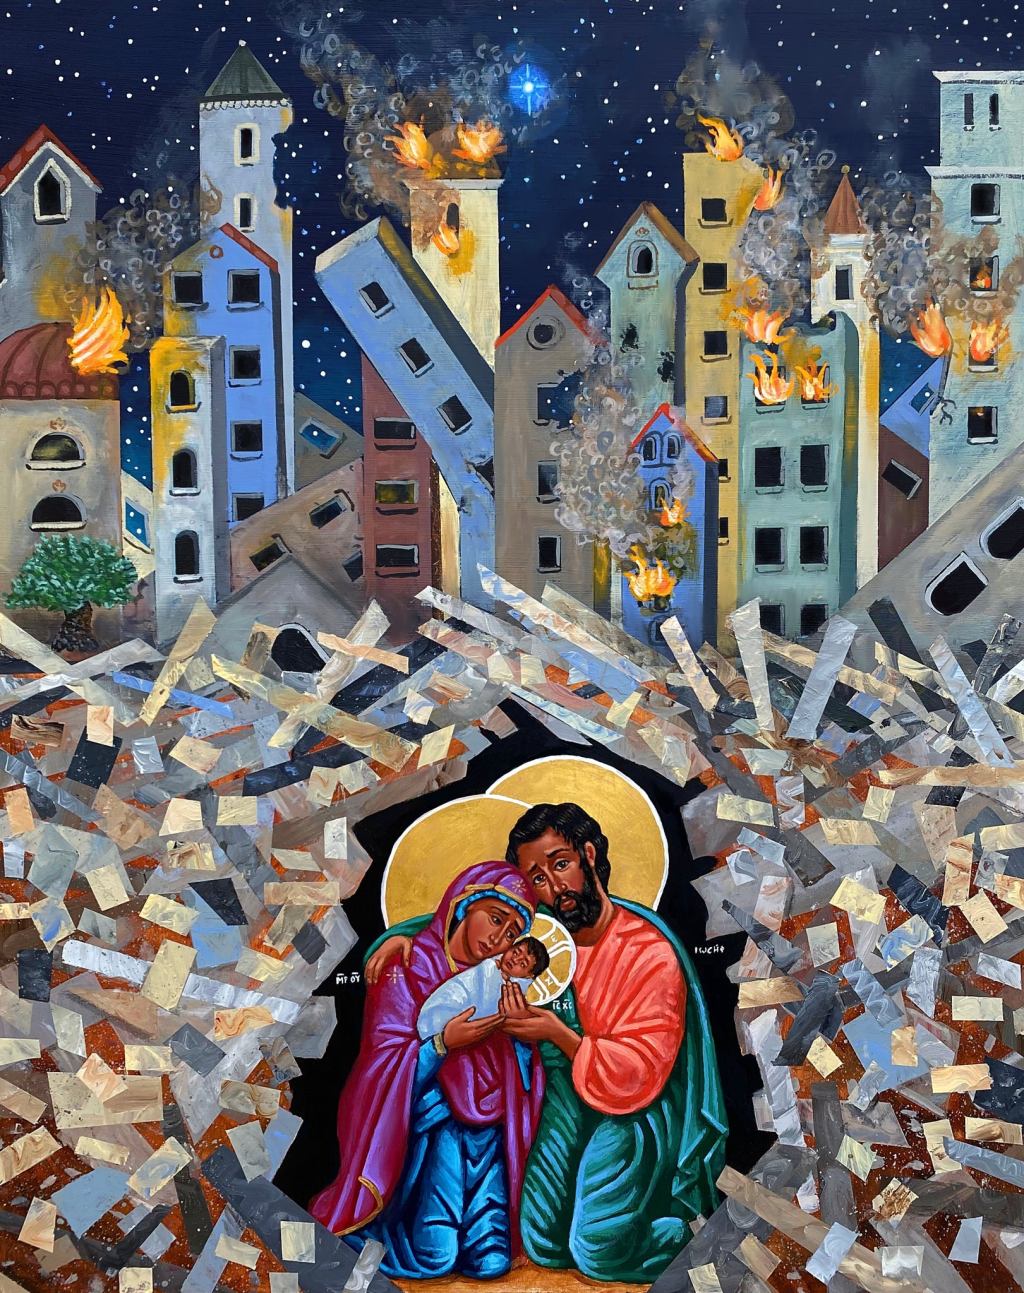 “god is under the rubble”